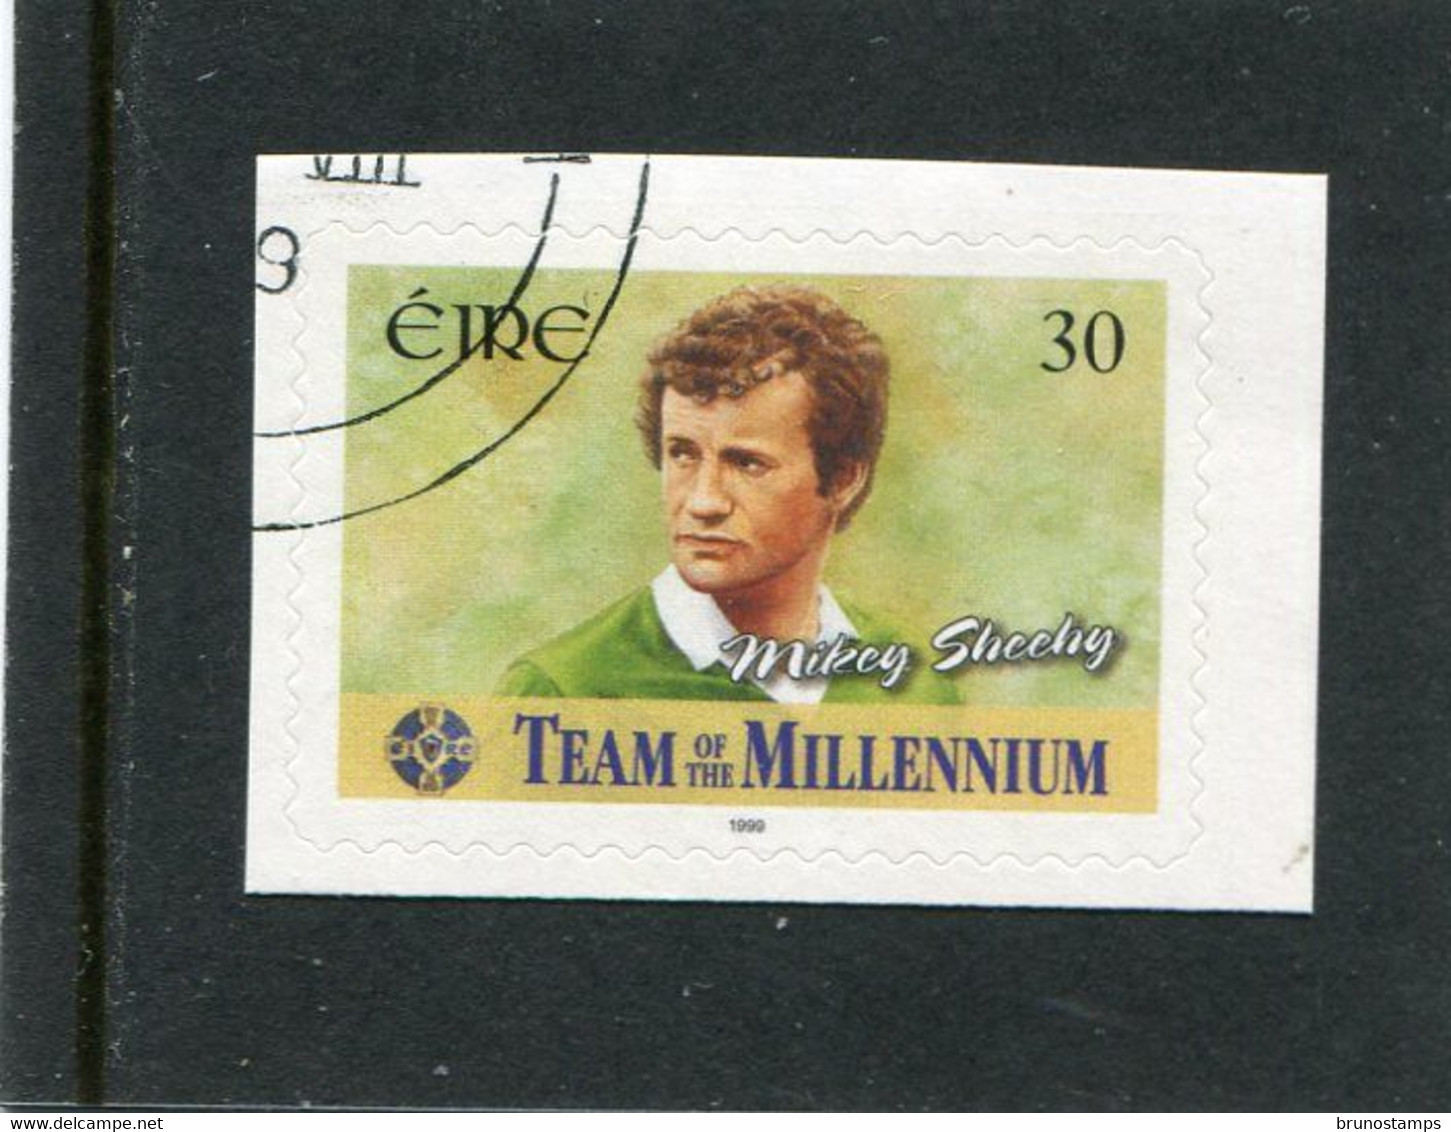 IRELAND/EIRE - 1999  30p  MIKEY SHEEHY  SELF ADHESIVE  FINE USED - Oblitérés